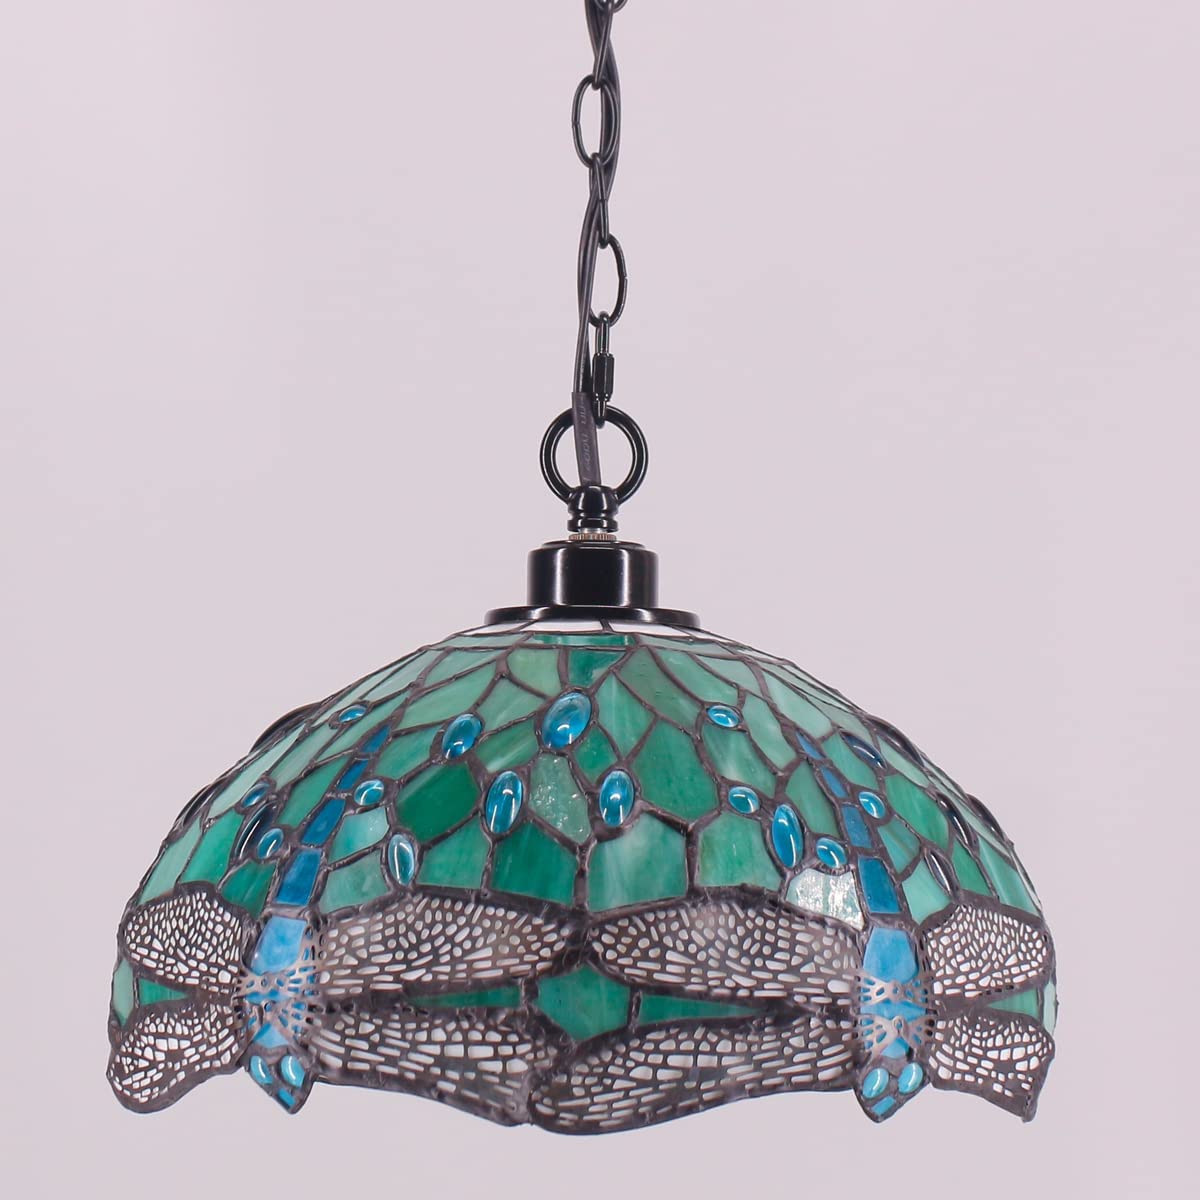 Werfactory® Tiffany Pendant Light 12 Inch Blue Stained Glass Dragonfly Hanging Lamp